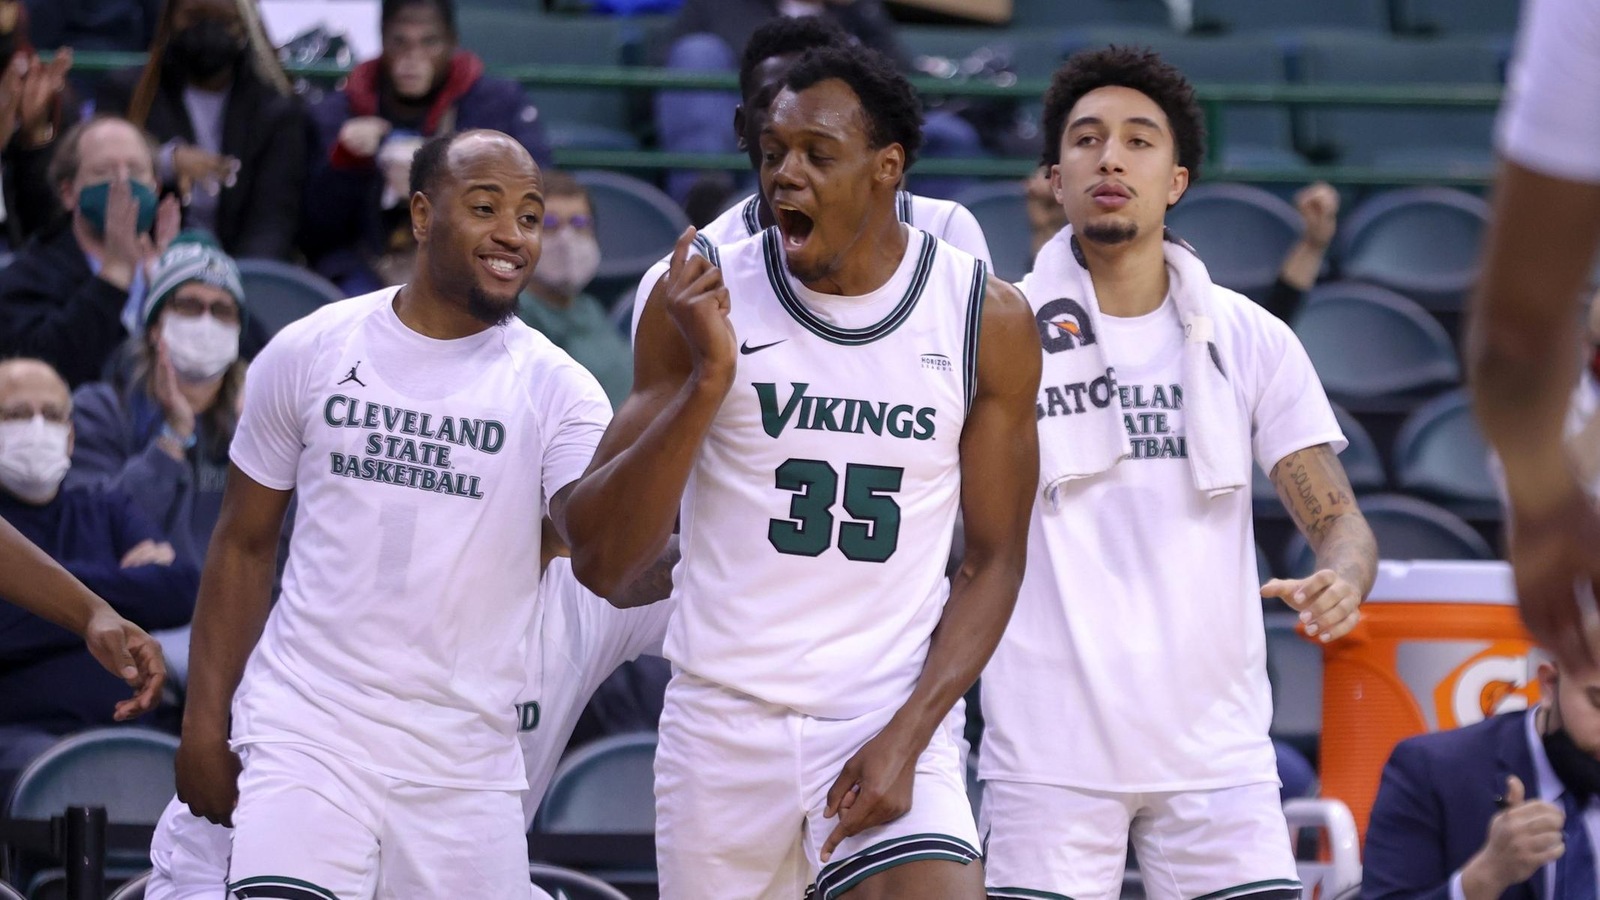 Cleveland State Men’s Basketball Earns 72-58 Victory Over NKU In #HLMBB Opener